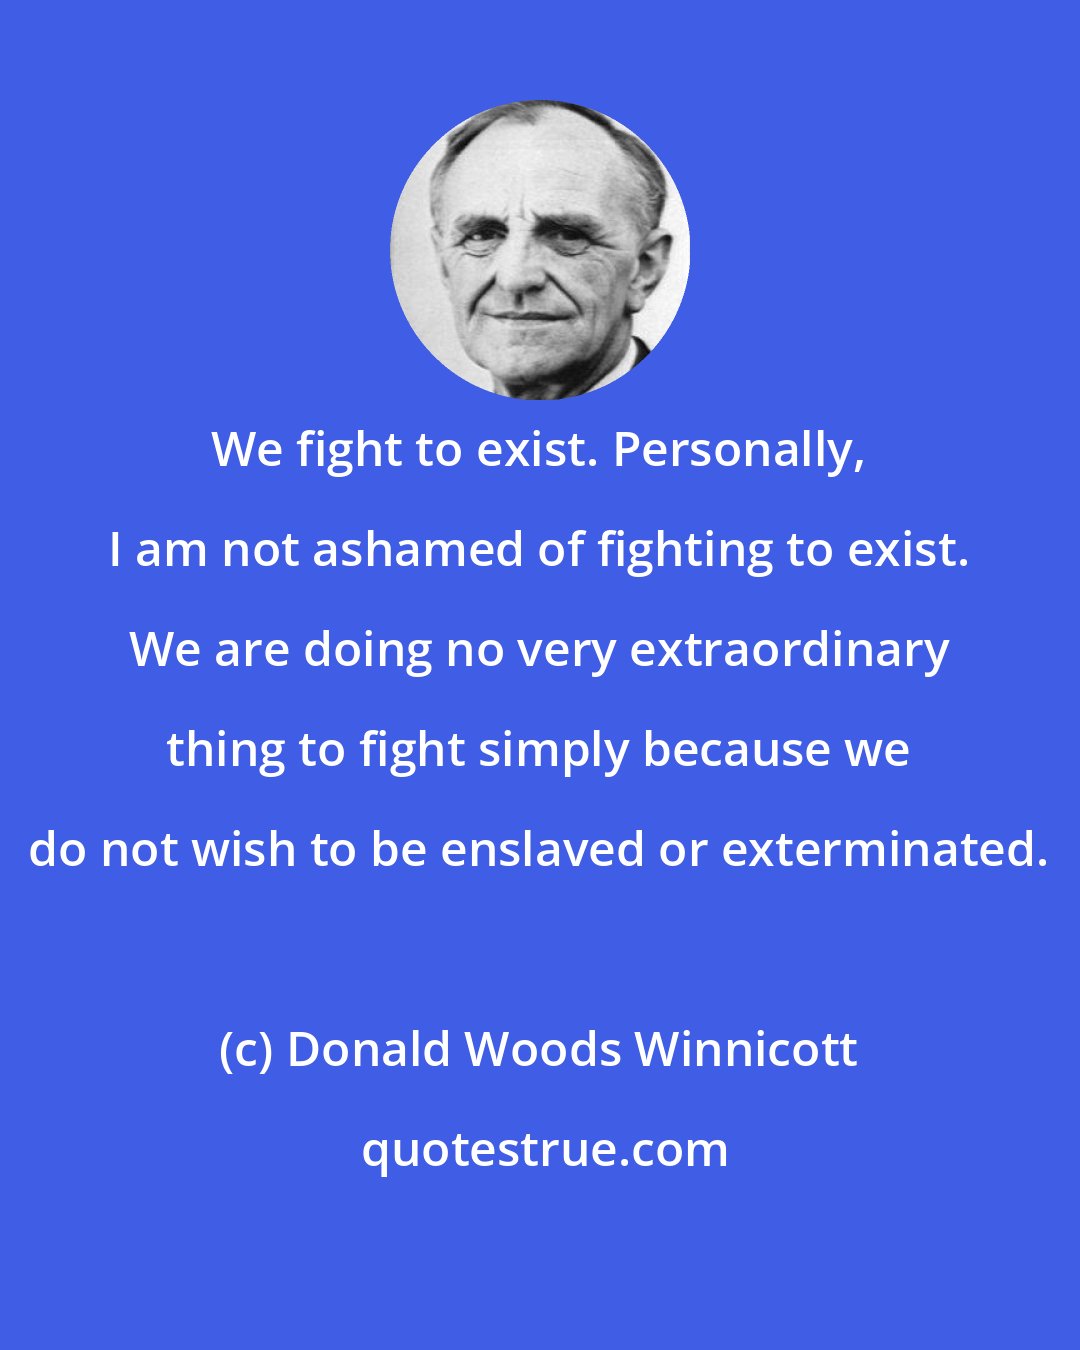 Donald Woods Winnicott: We fight to exist. Personally, I am not ashamed of fighting to exist. We are doing no very extraordinary thing to fight simply because we do not wish to be enslaved or exterminated.